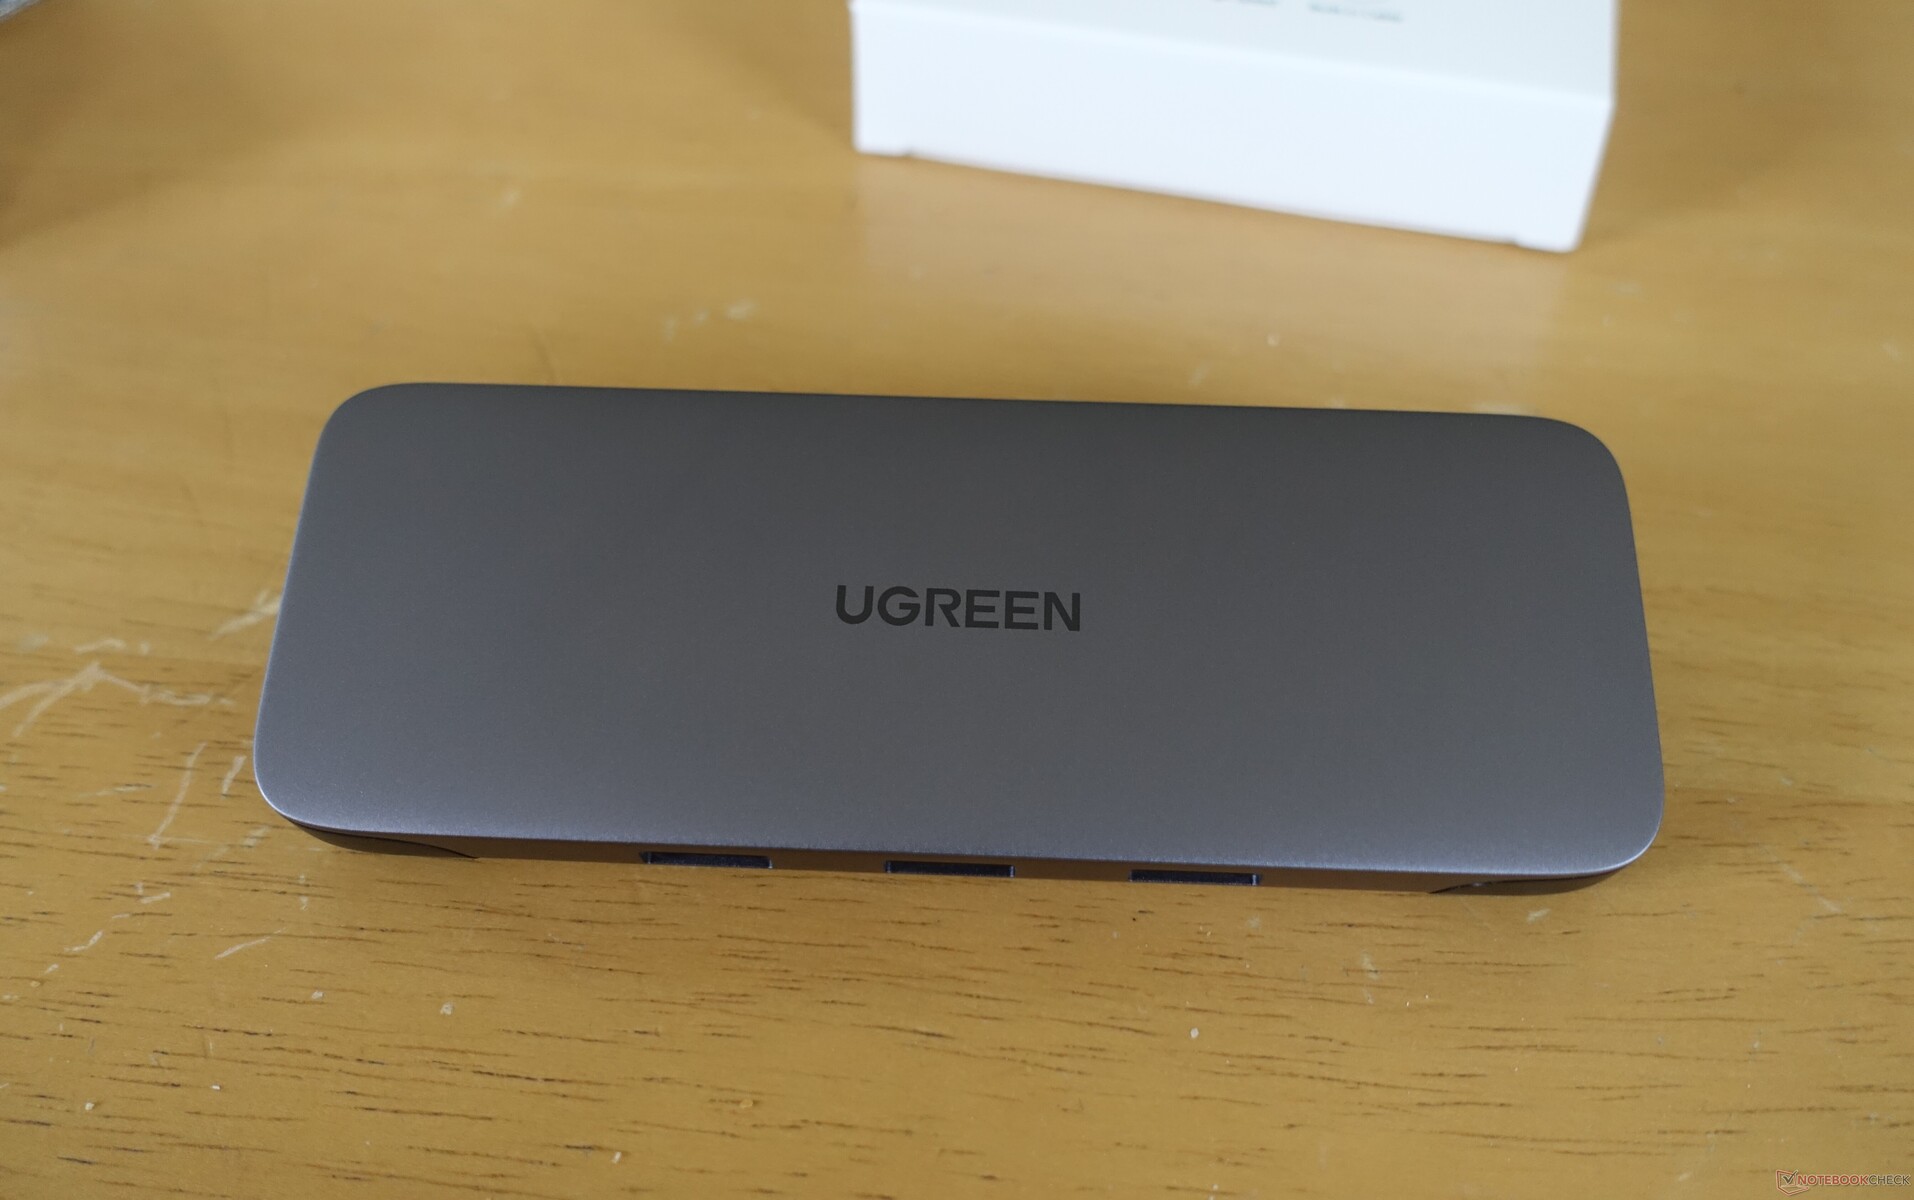 Ugreen 9-in-1 Docking Station: Pro Connectivity Reviewed - Fossbytes